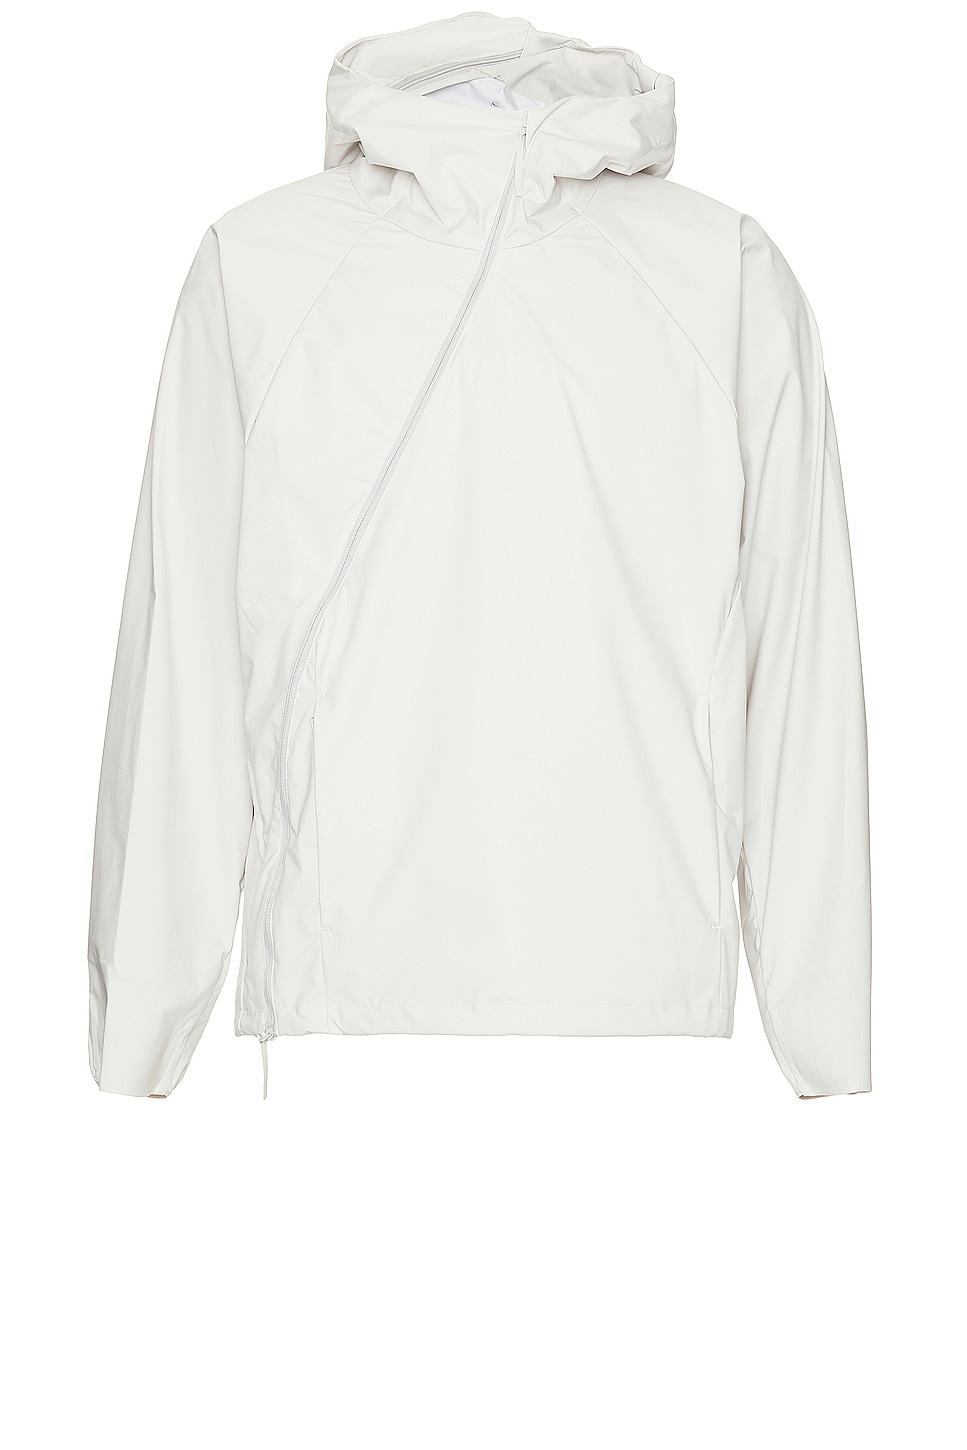 Image 1 of POST ARCHIVE FACTION (PAF) 6.0 Technical Jacket in Ivory